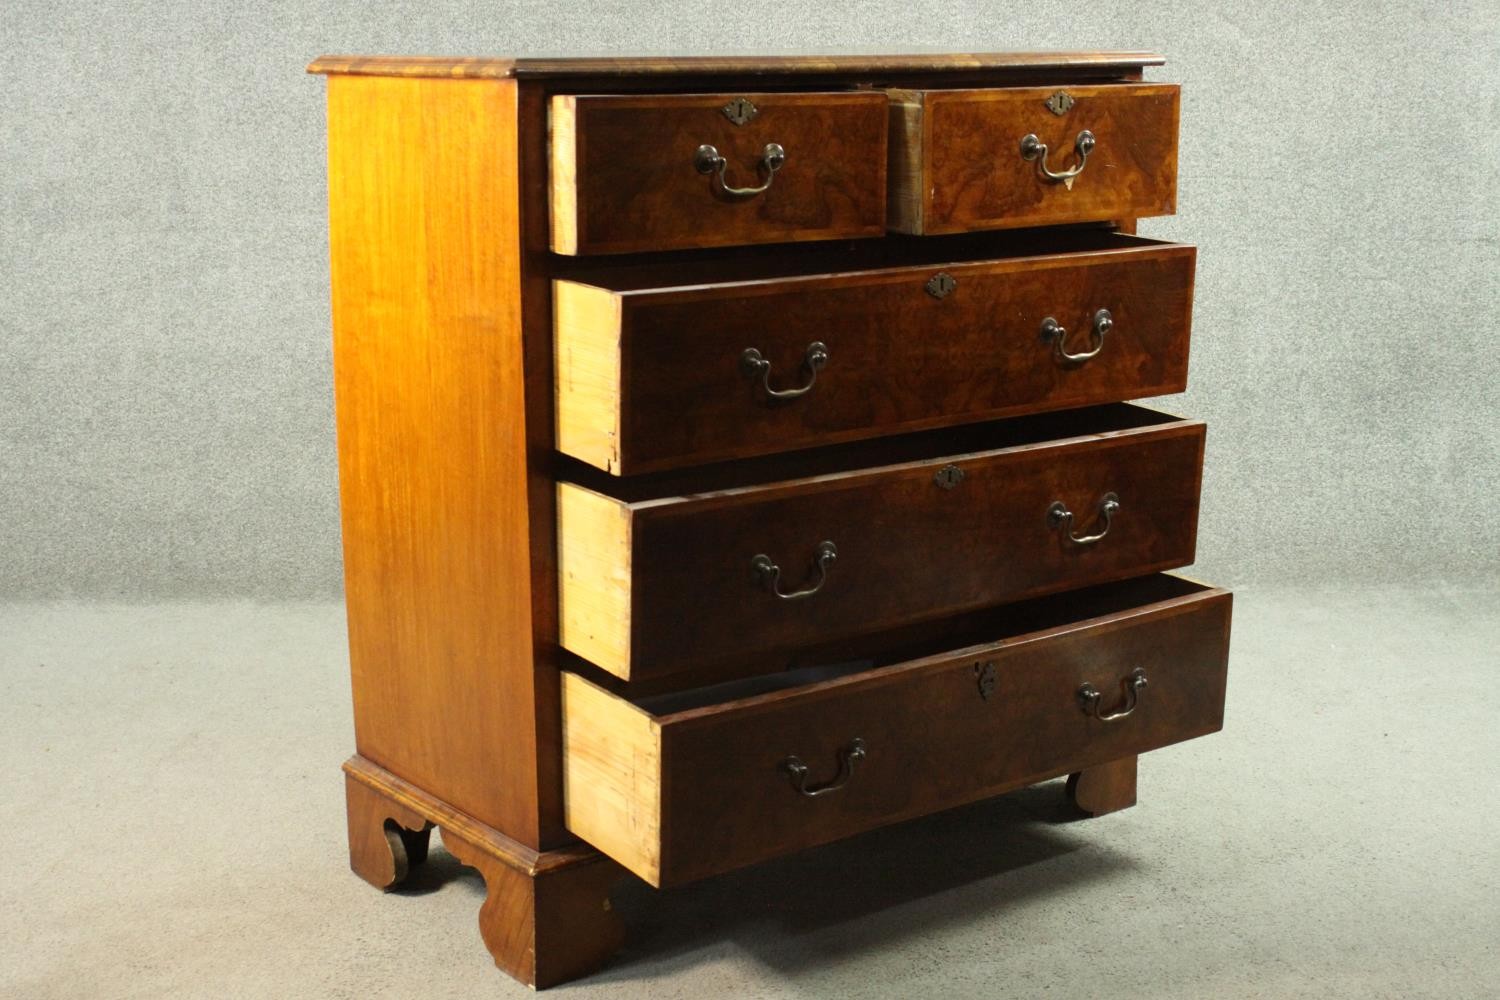 A 19th century early Georgian style walnut, crossbanded and featherbanded chest of drawers with - Image 6 of 8